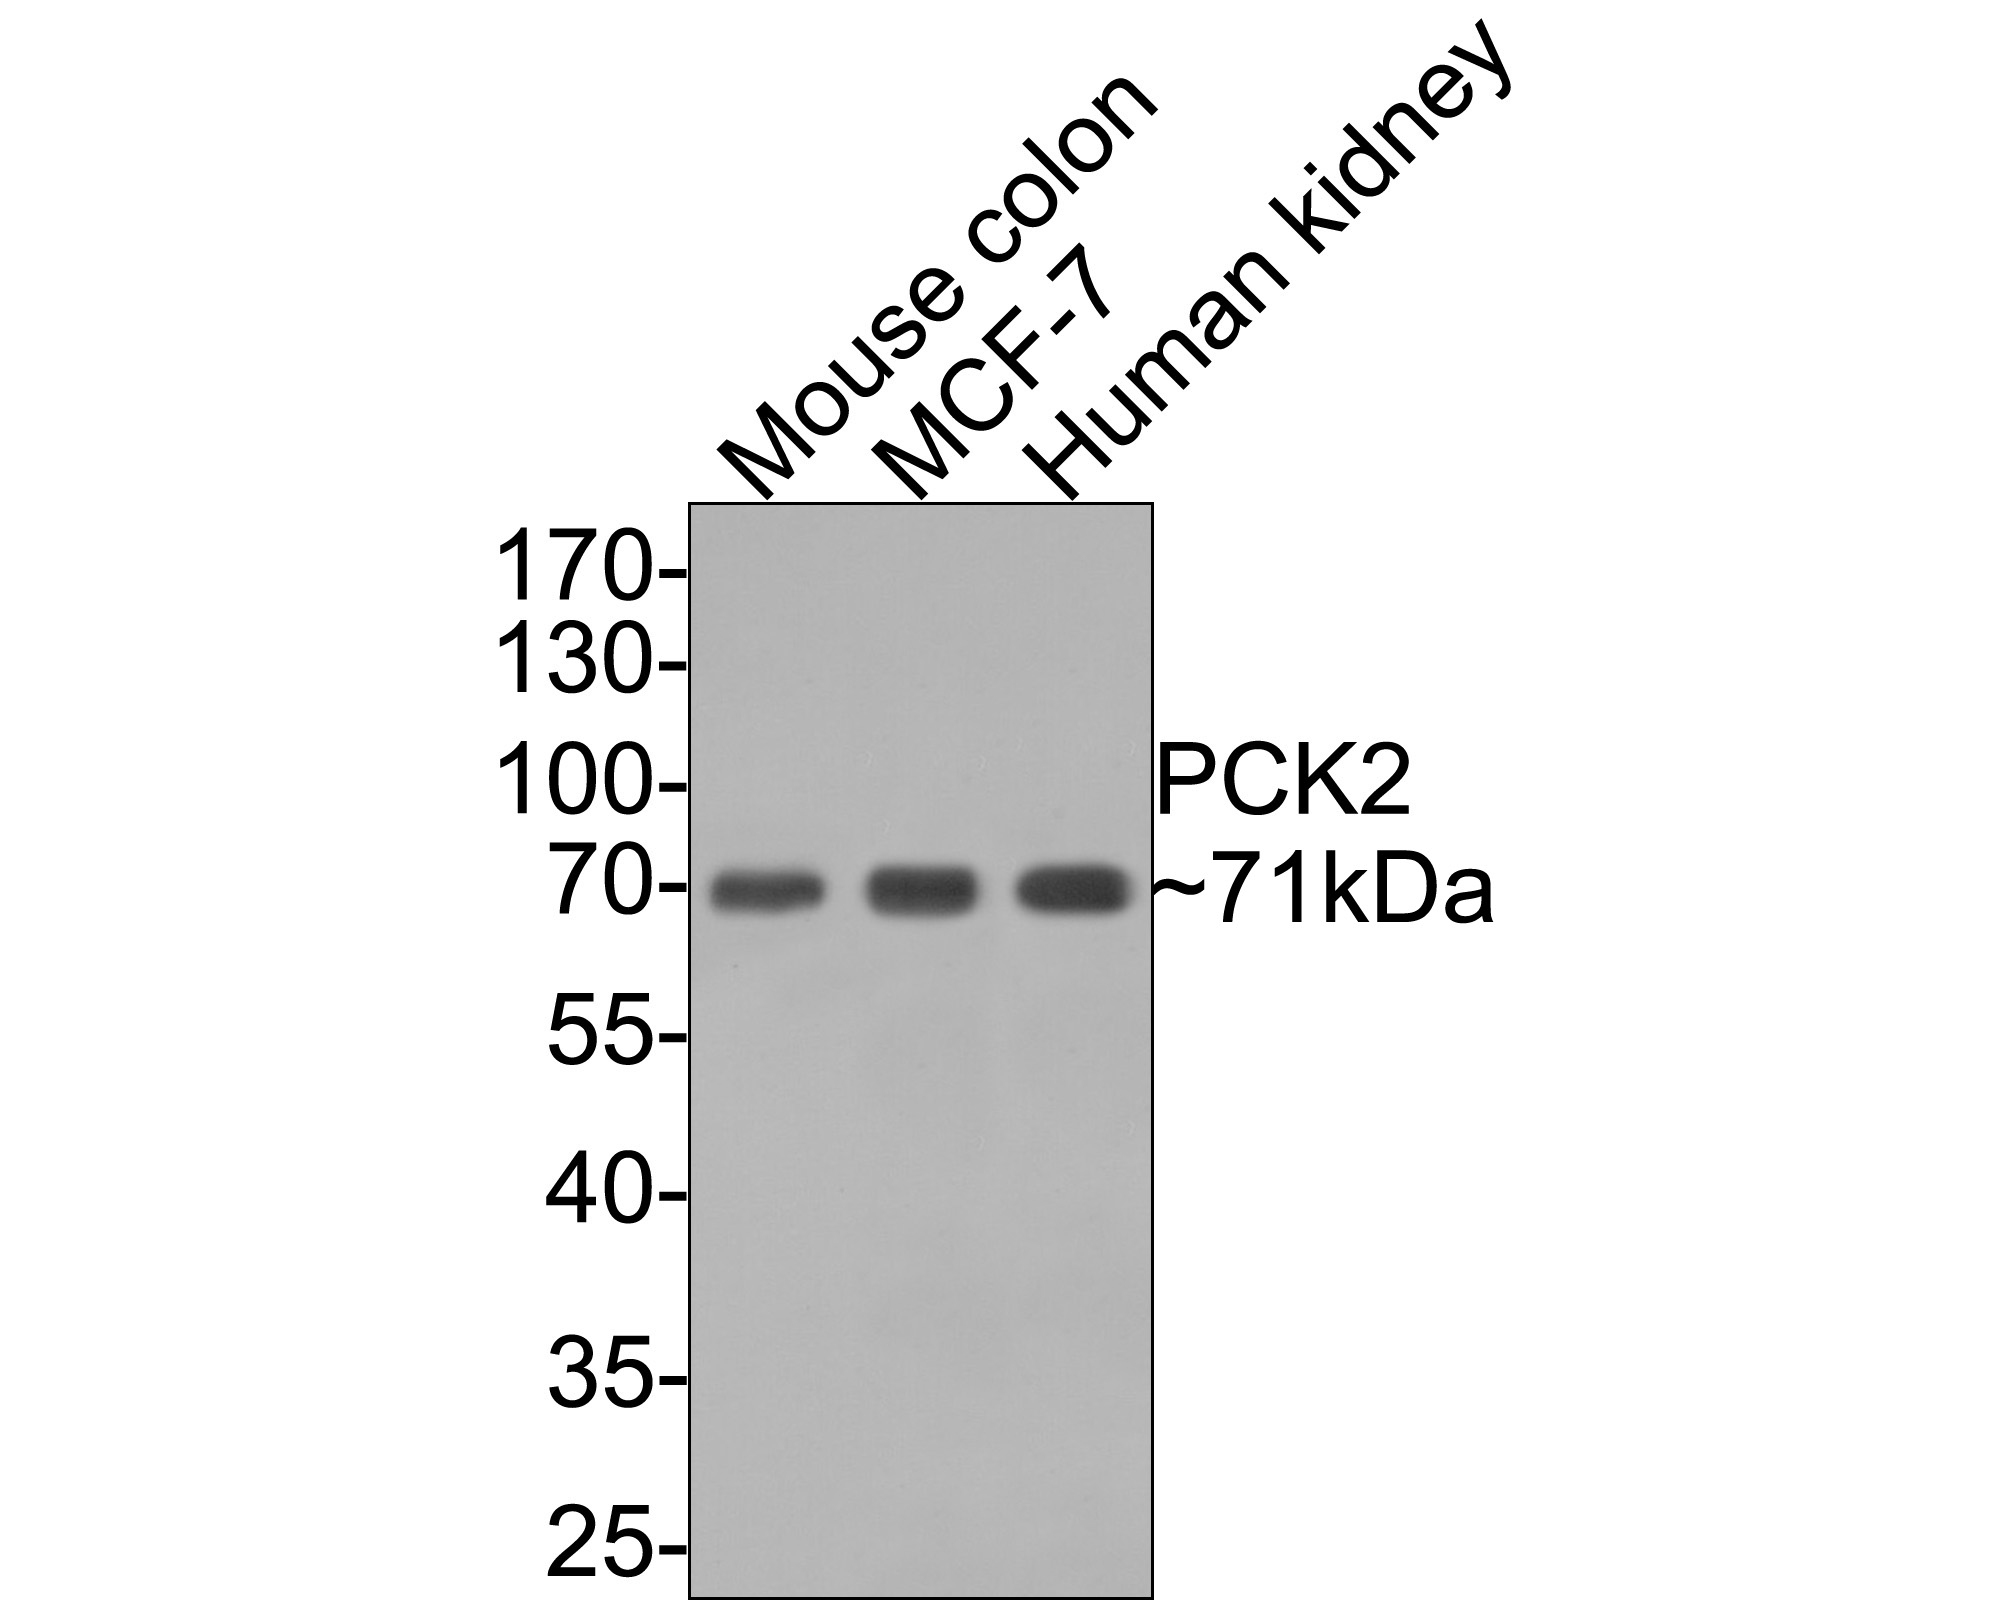 Western blot analysis of PCK2 on different lysates with Rabbit anti-PCK2 antibody (ET7107-29) at 1/500 dilution.<br />
<br />
Lane 1: Mouse colon tissue lysate (20 µg/Lane)<br />
Lane 2: MCF-7 cell lysate (10 µg/Lane)<br />
Lane 3: Human kidney tissue lysate (20 µg/Lane)<br />
<br />
Predicted band size: 71 kDa<br />
Observed band size: 71 kDa<br />
<br />
Exposure time: 1 minute;<br />
<br />
10% SDS-PAGE gel.<br />
<br />
Proteins were transferred to a PVDF membrane and blocked with 5% NFDM/TBST for 1 hour at room temperature. The primary antibody (ET7107-29) at 1/500 dilution was used in 5% NFDM/TBST at room temperature for 2 hours. Goat Anti-Rabbit IgG - HRP Secondary Antibody (HA1001) at 1:300,000 dilution was used for 1 hour at room temperature.